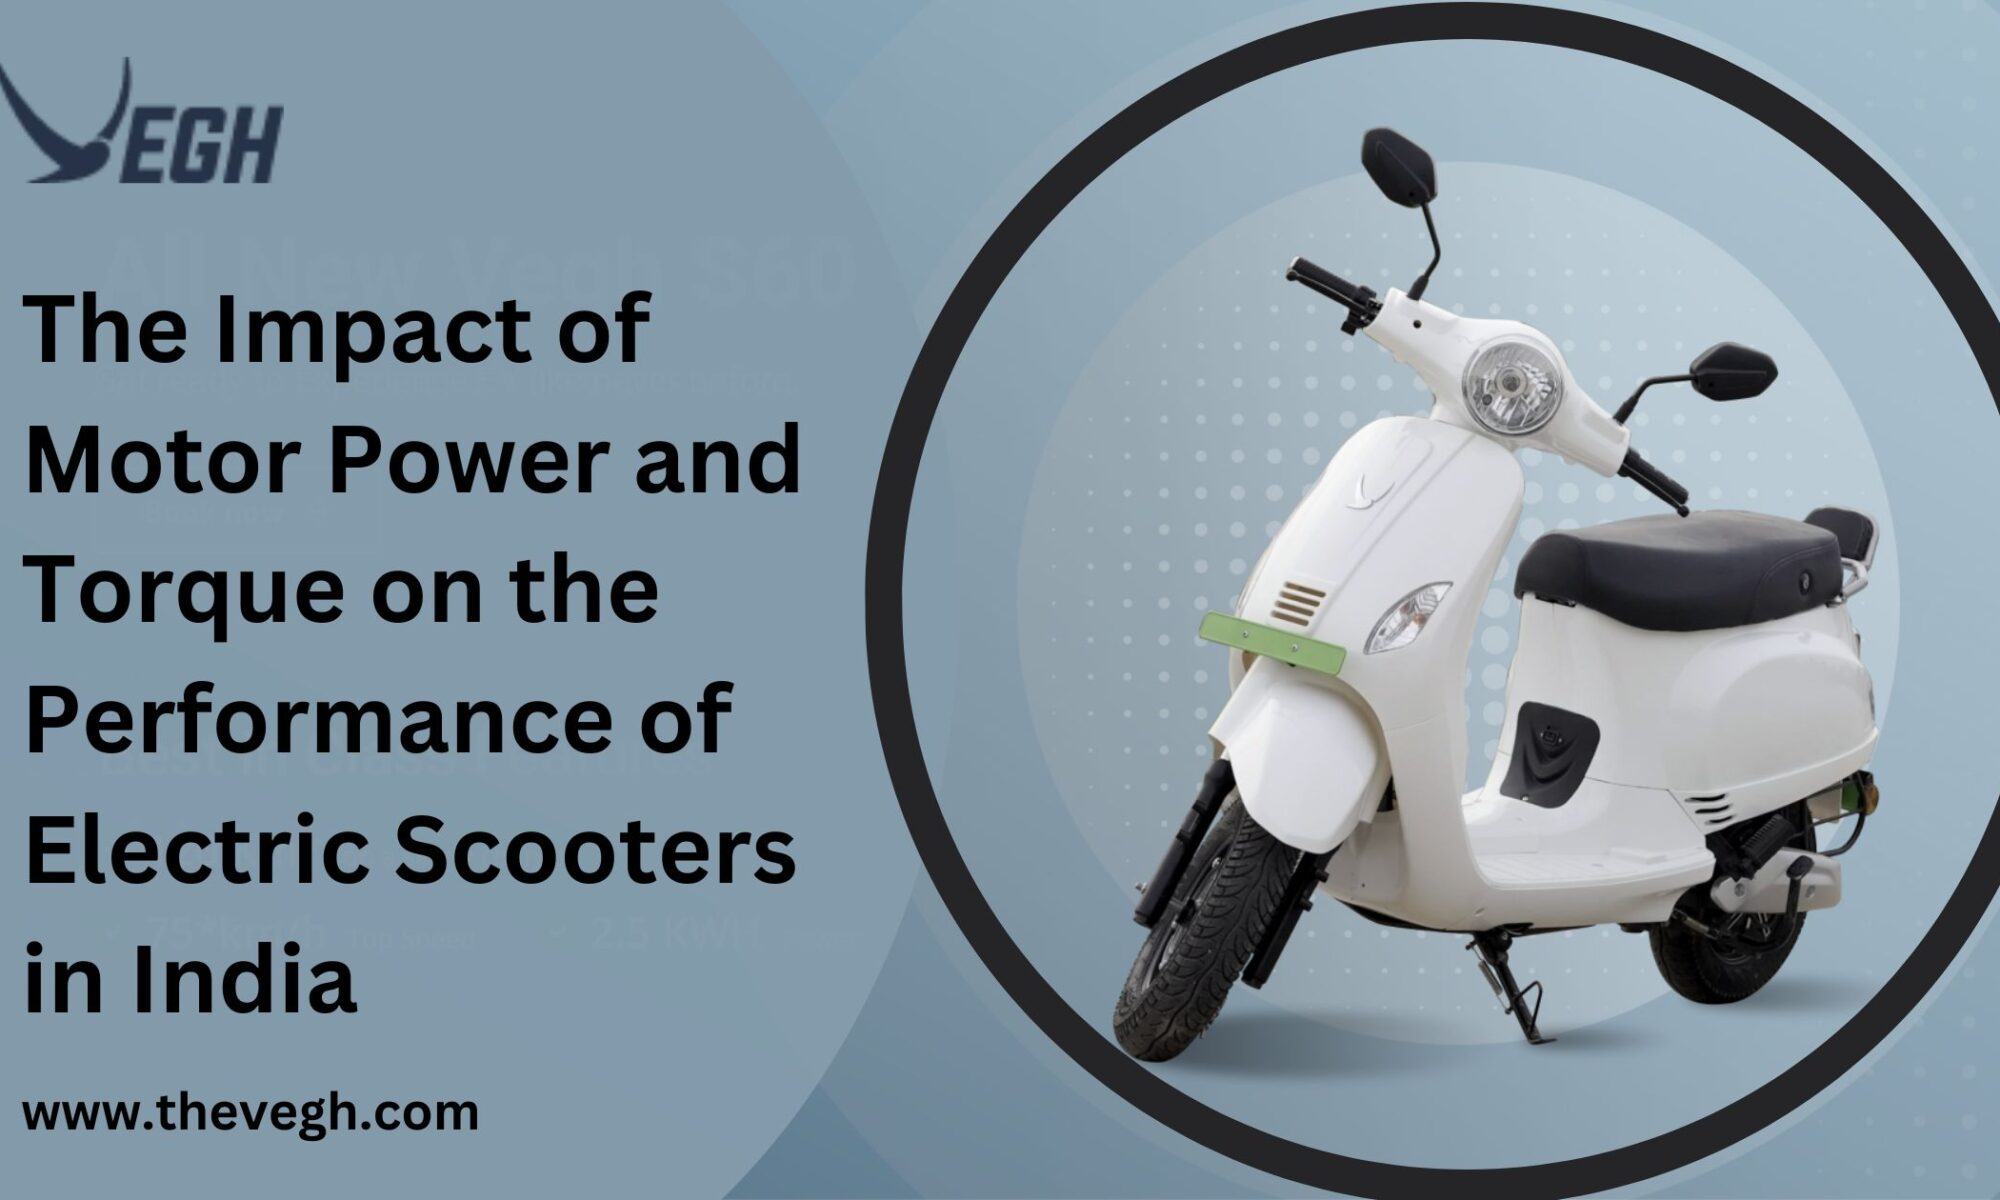 The Impact of Motor Power and Torque on the Performance of Electric Scooters in India